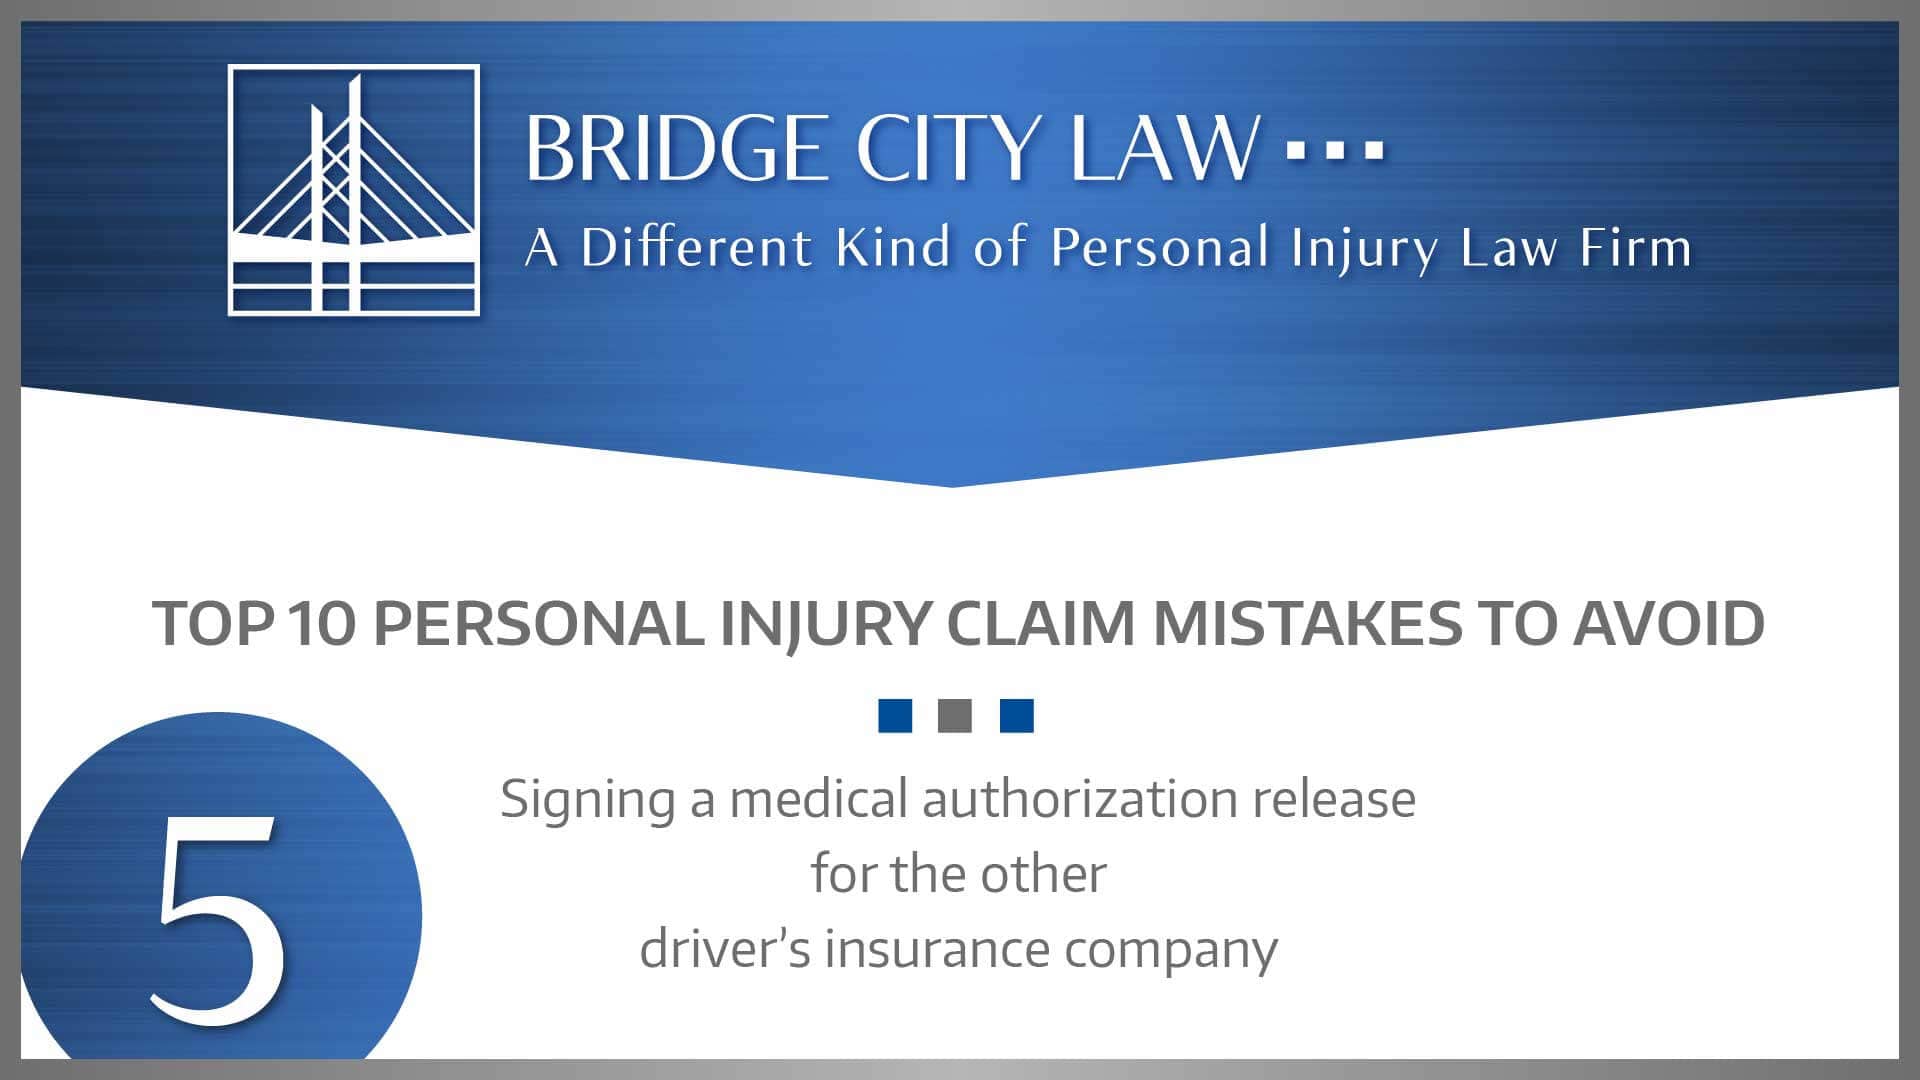 #5 MISTAKE: Signing a medical authorization release for the other driver’s insurance company